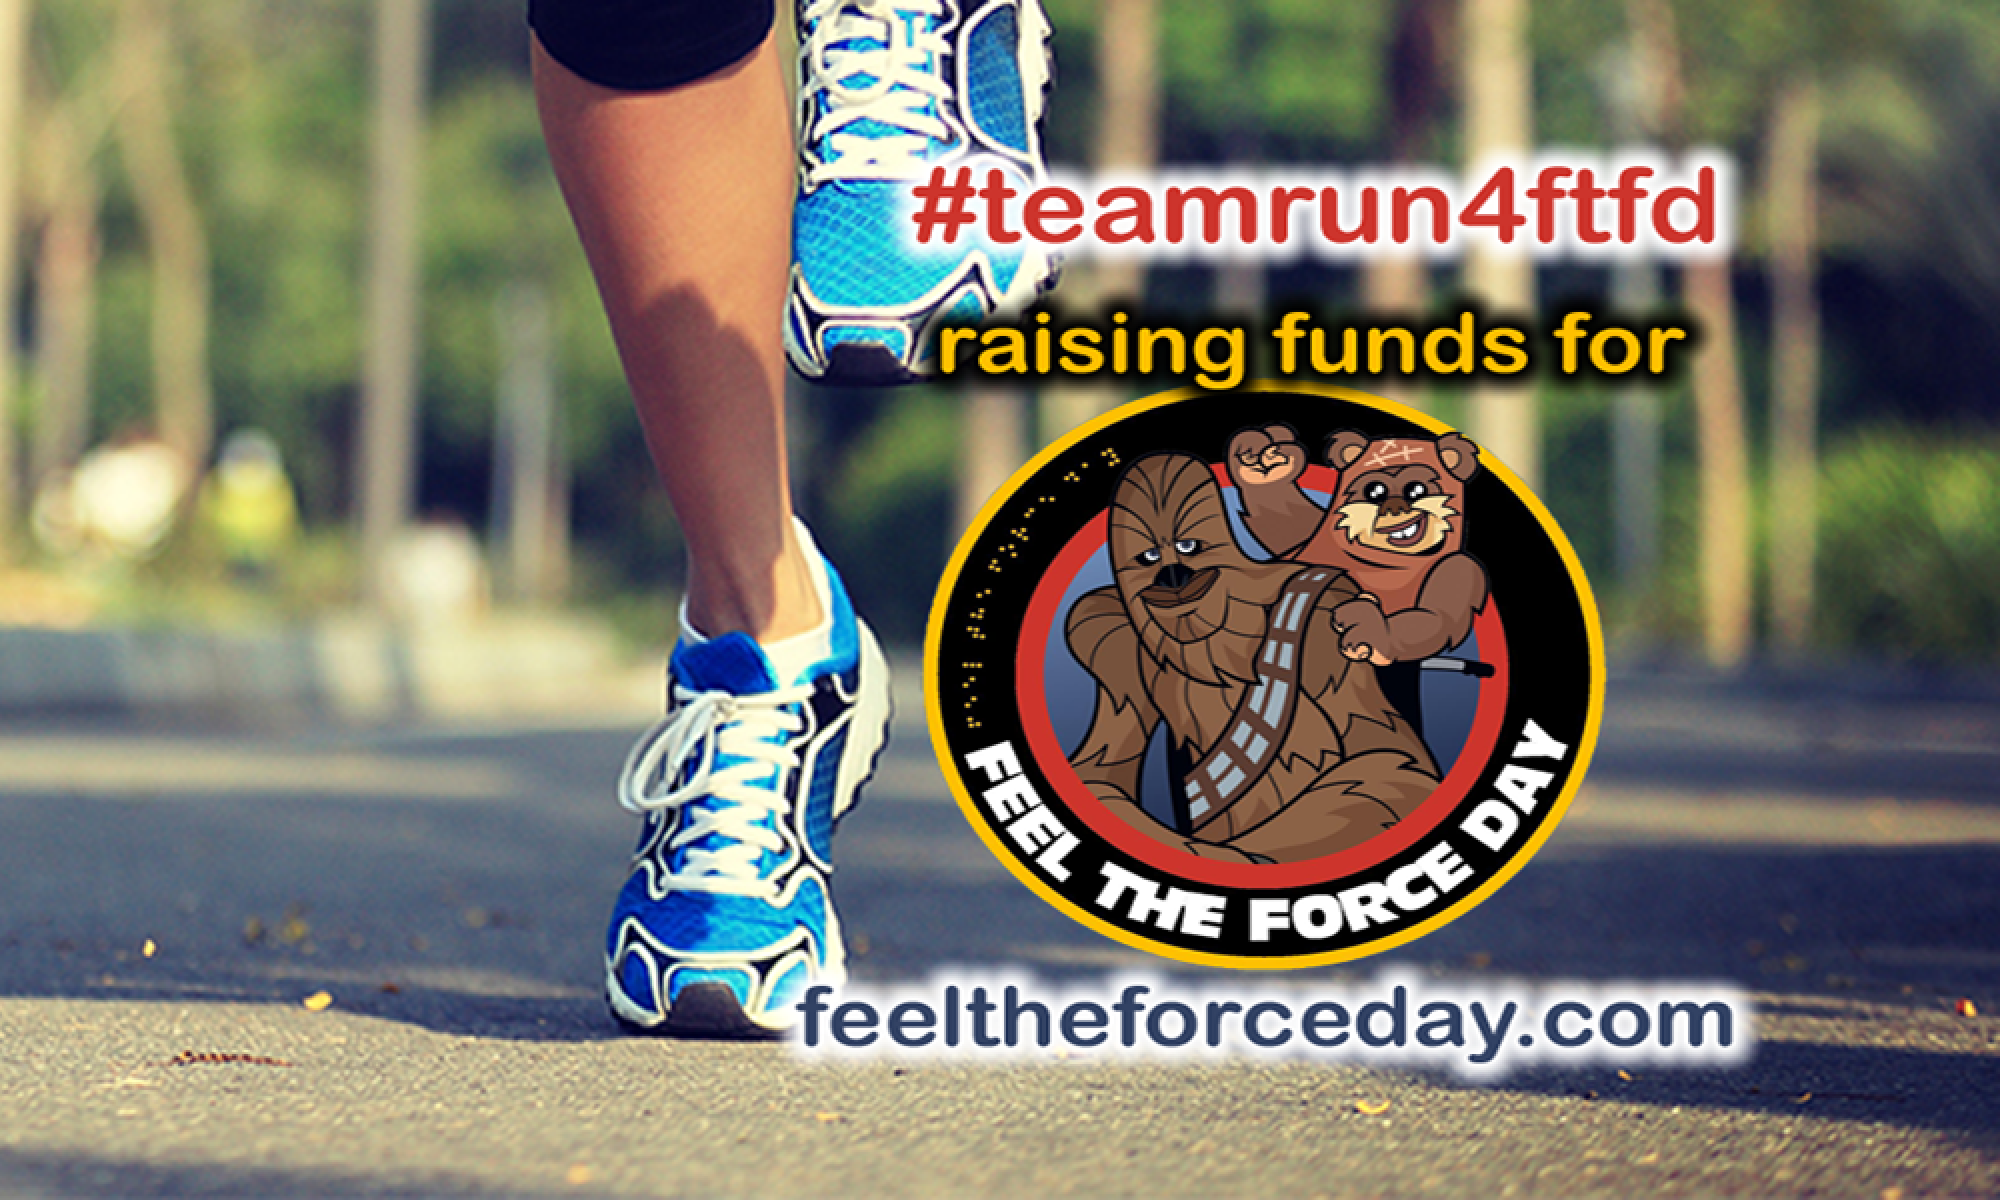 Run 4 Feel the Force Day